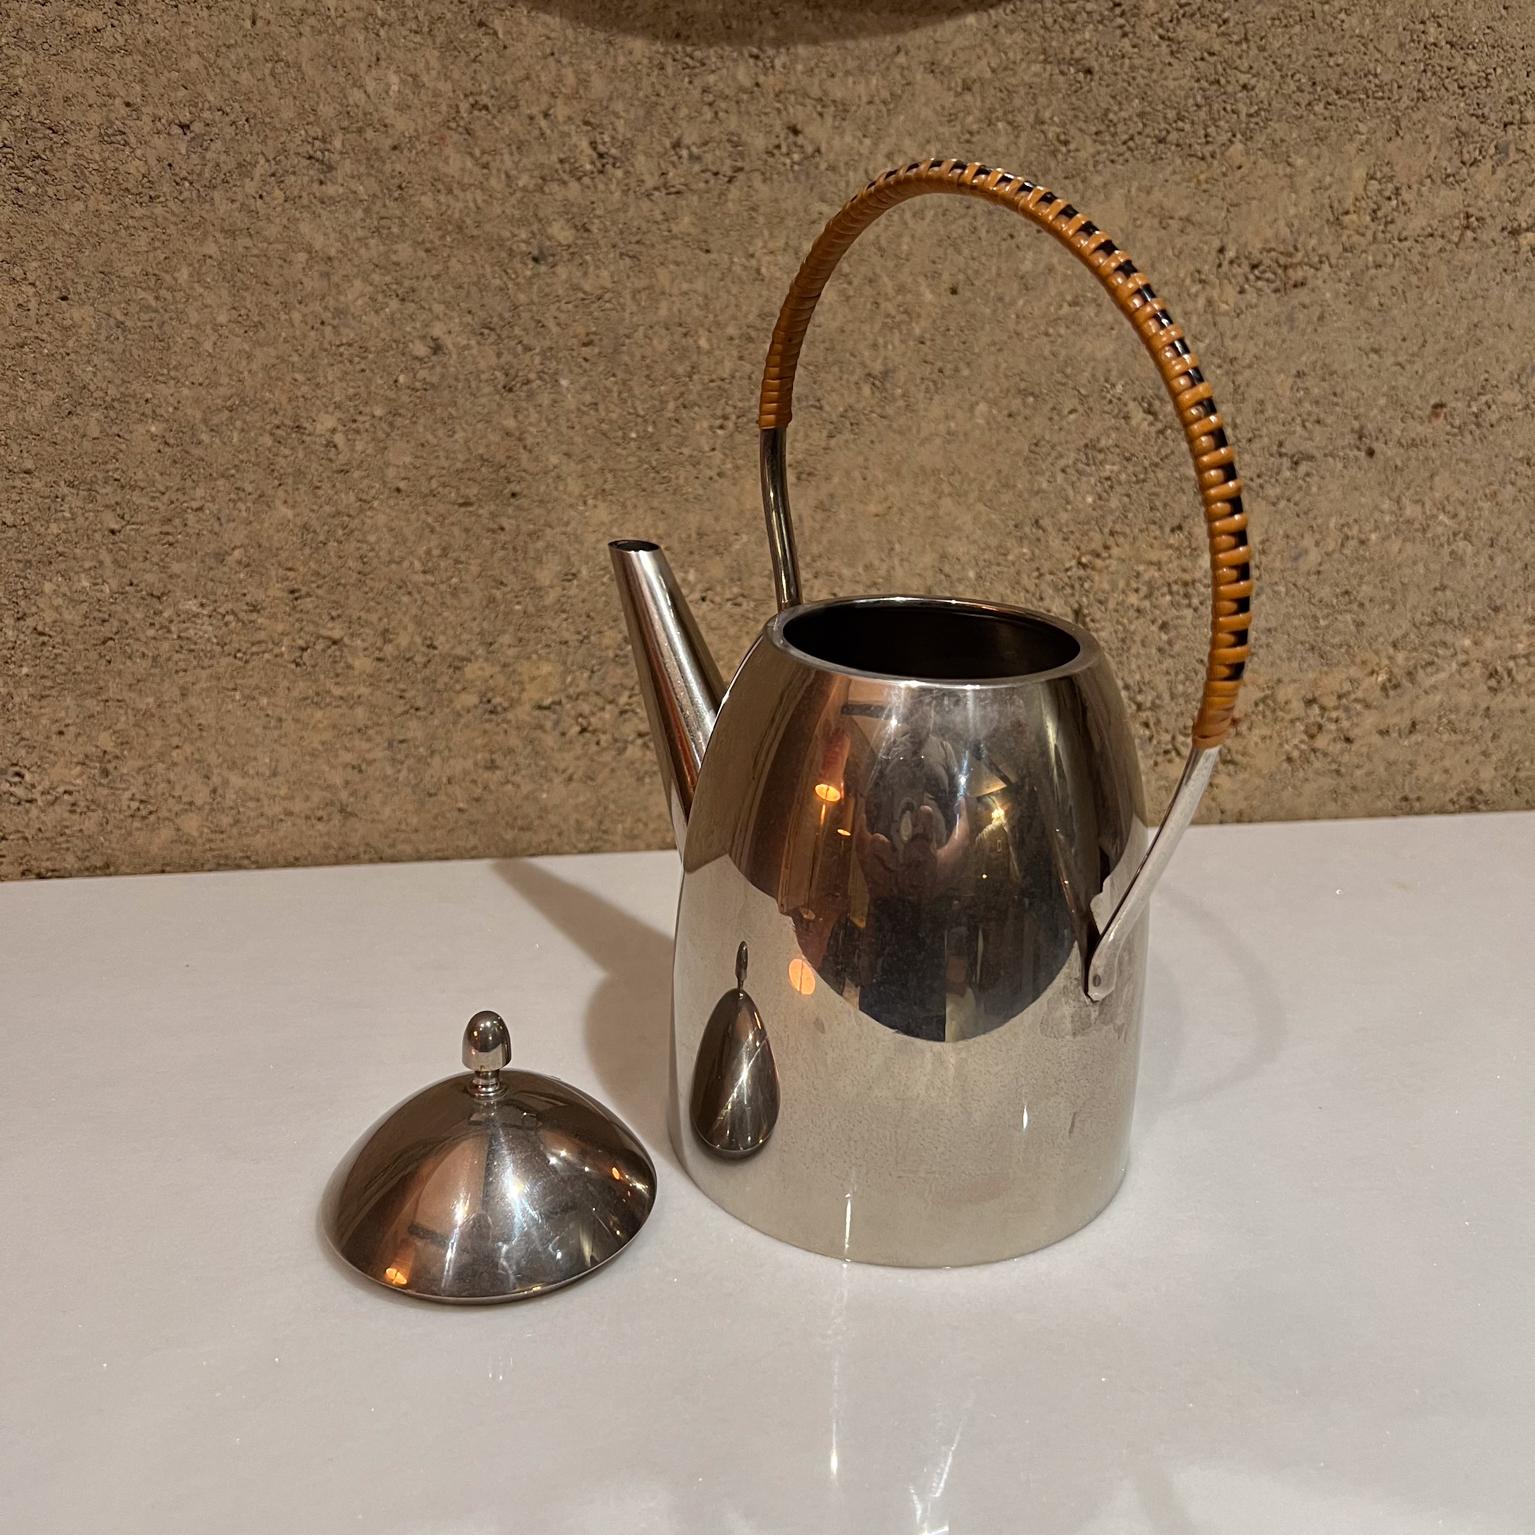 1940s Bauhaus Stainless Tea Kettle Pot Style Peter Behrens In Good Condition For Sale In Chula Vista, CA